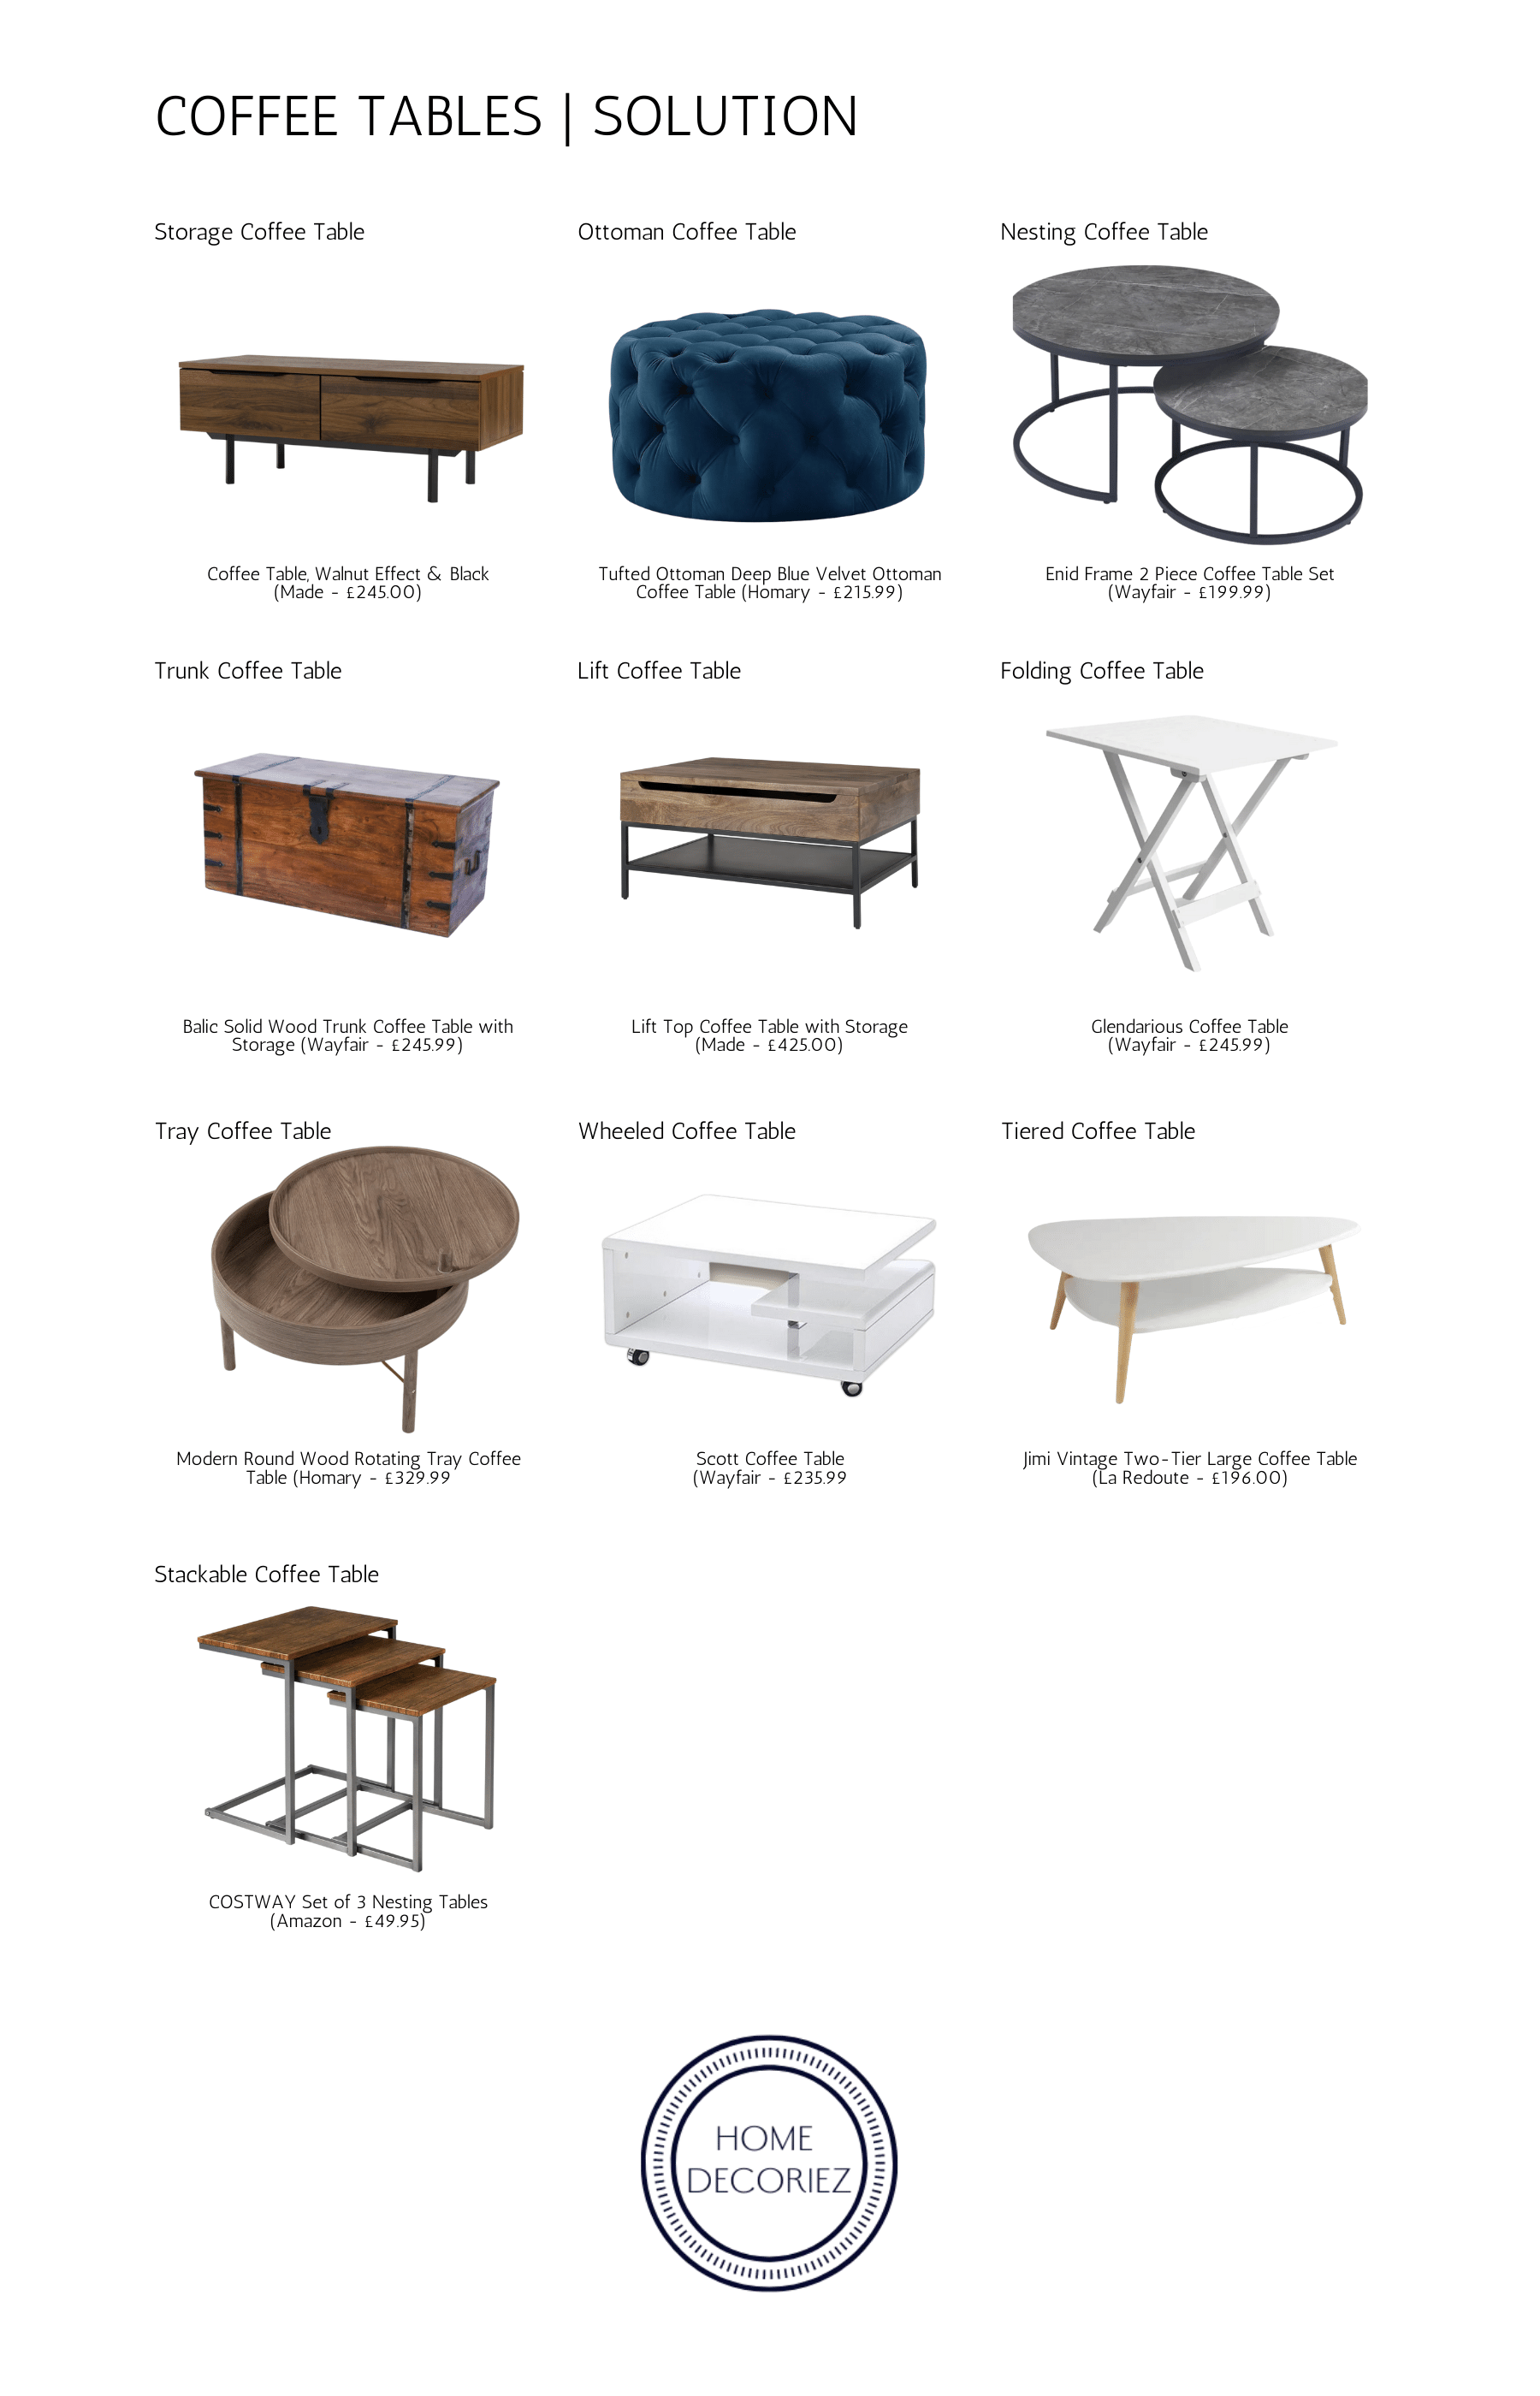 Solutions Coffee table types infographic